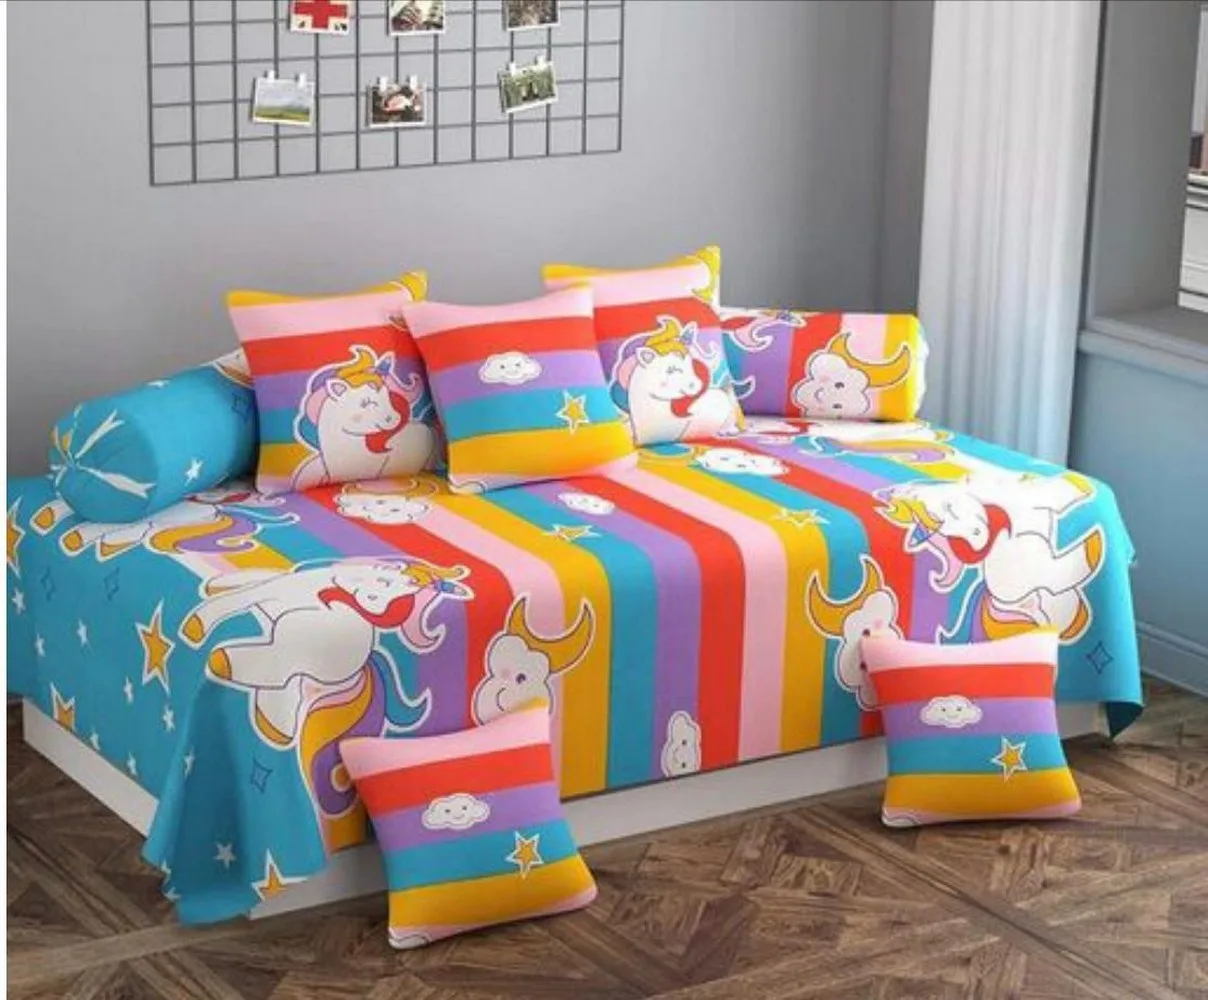 Diwan Set 1 bedsheet 60x90, 5 cushion cover 16x16, 2 bolster cover 16x30, 8 pieces, colorful, unicorn